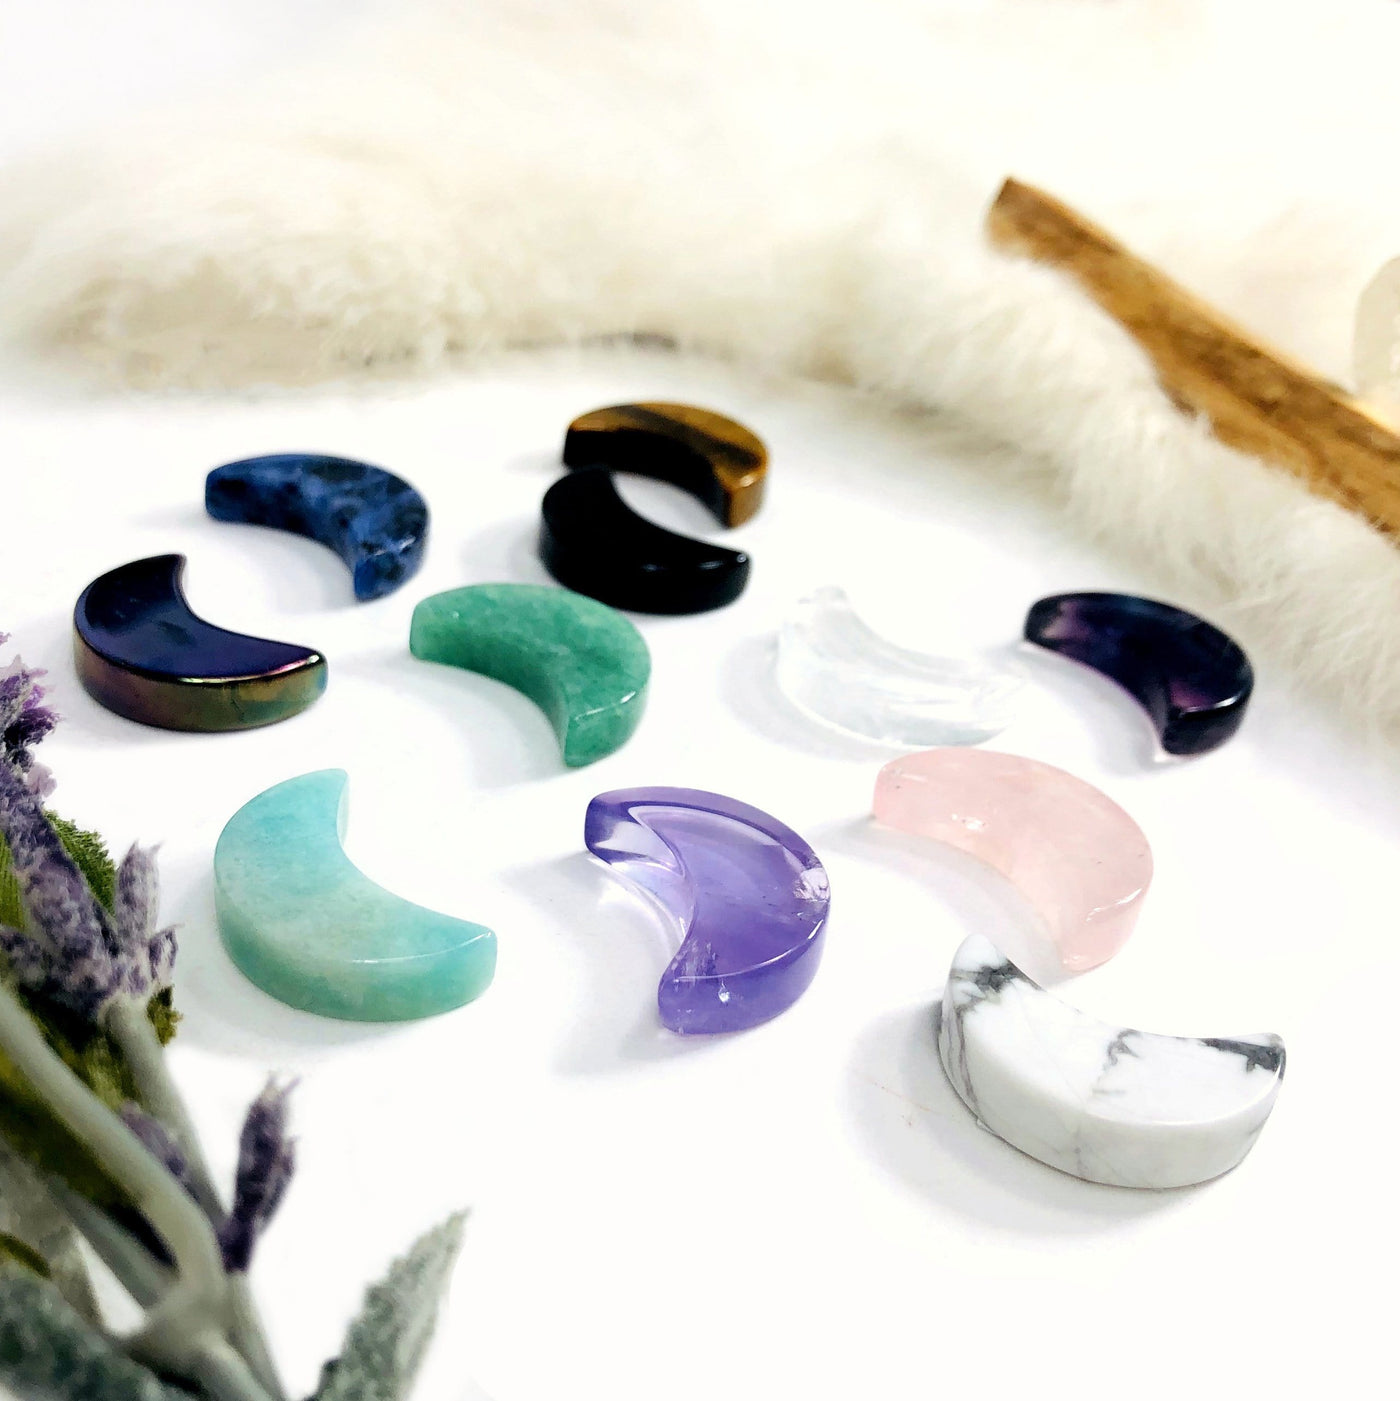 Gemstone Moon Cabochons of assorted stones from a side angle to see thickness